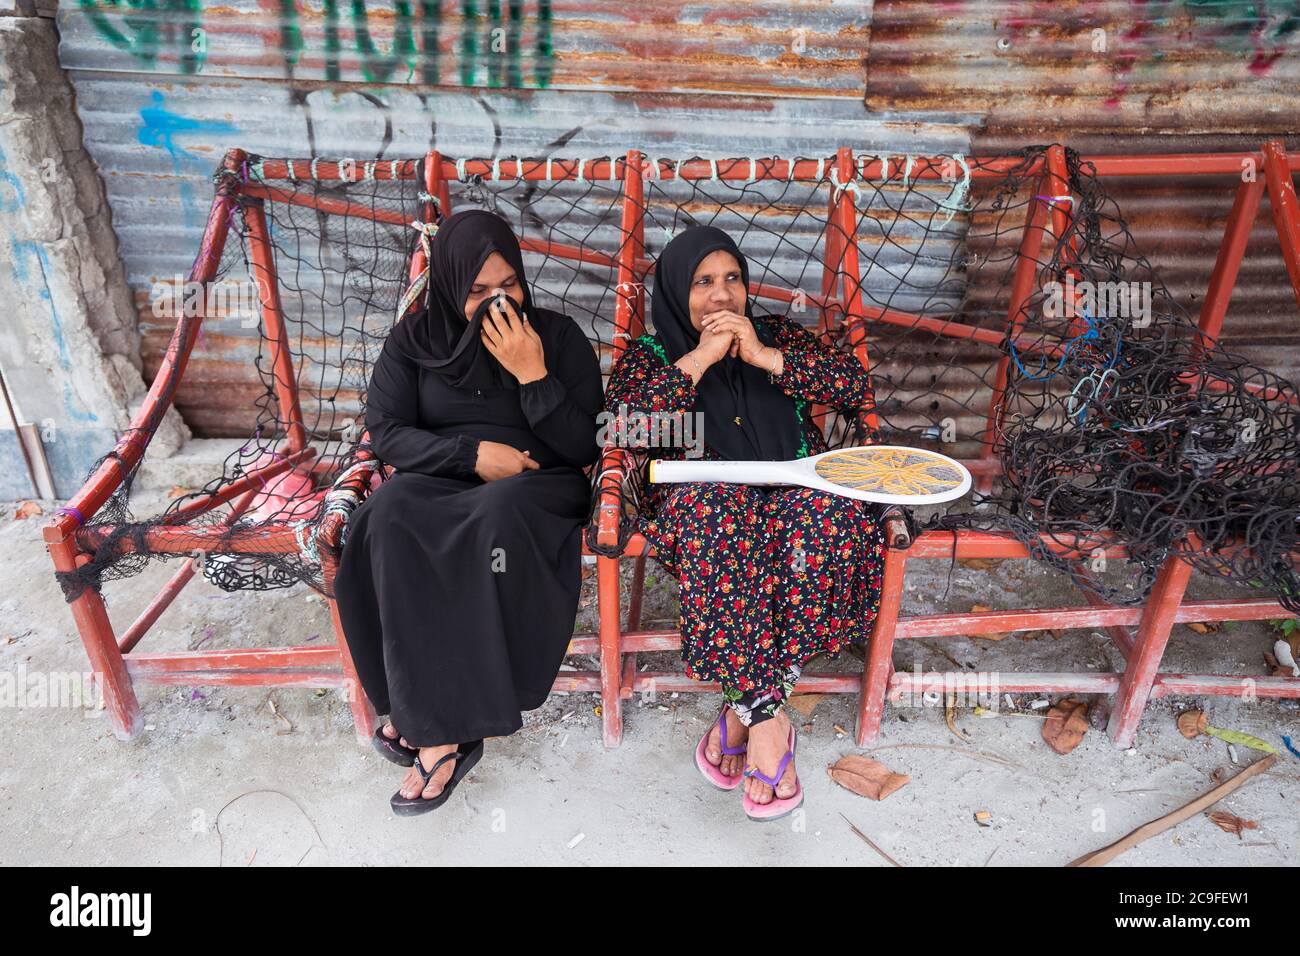 Bodufolhudhoo / Maldives - August 17, 2019: muslim women with black hijab sitting on traditional maldivian bench made with ropes Stock Photo